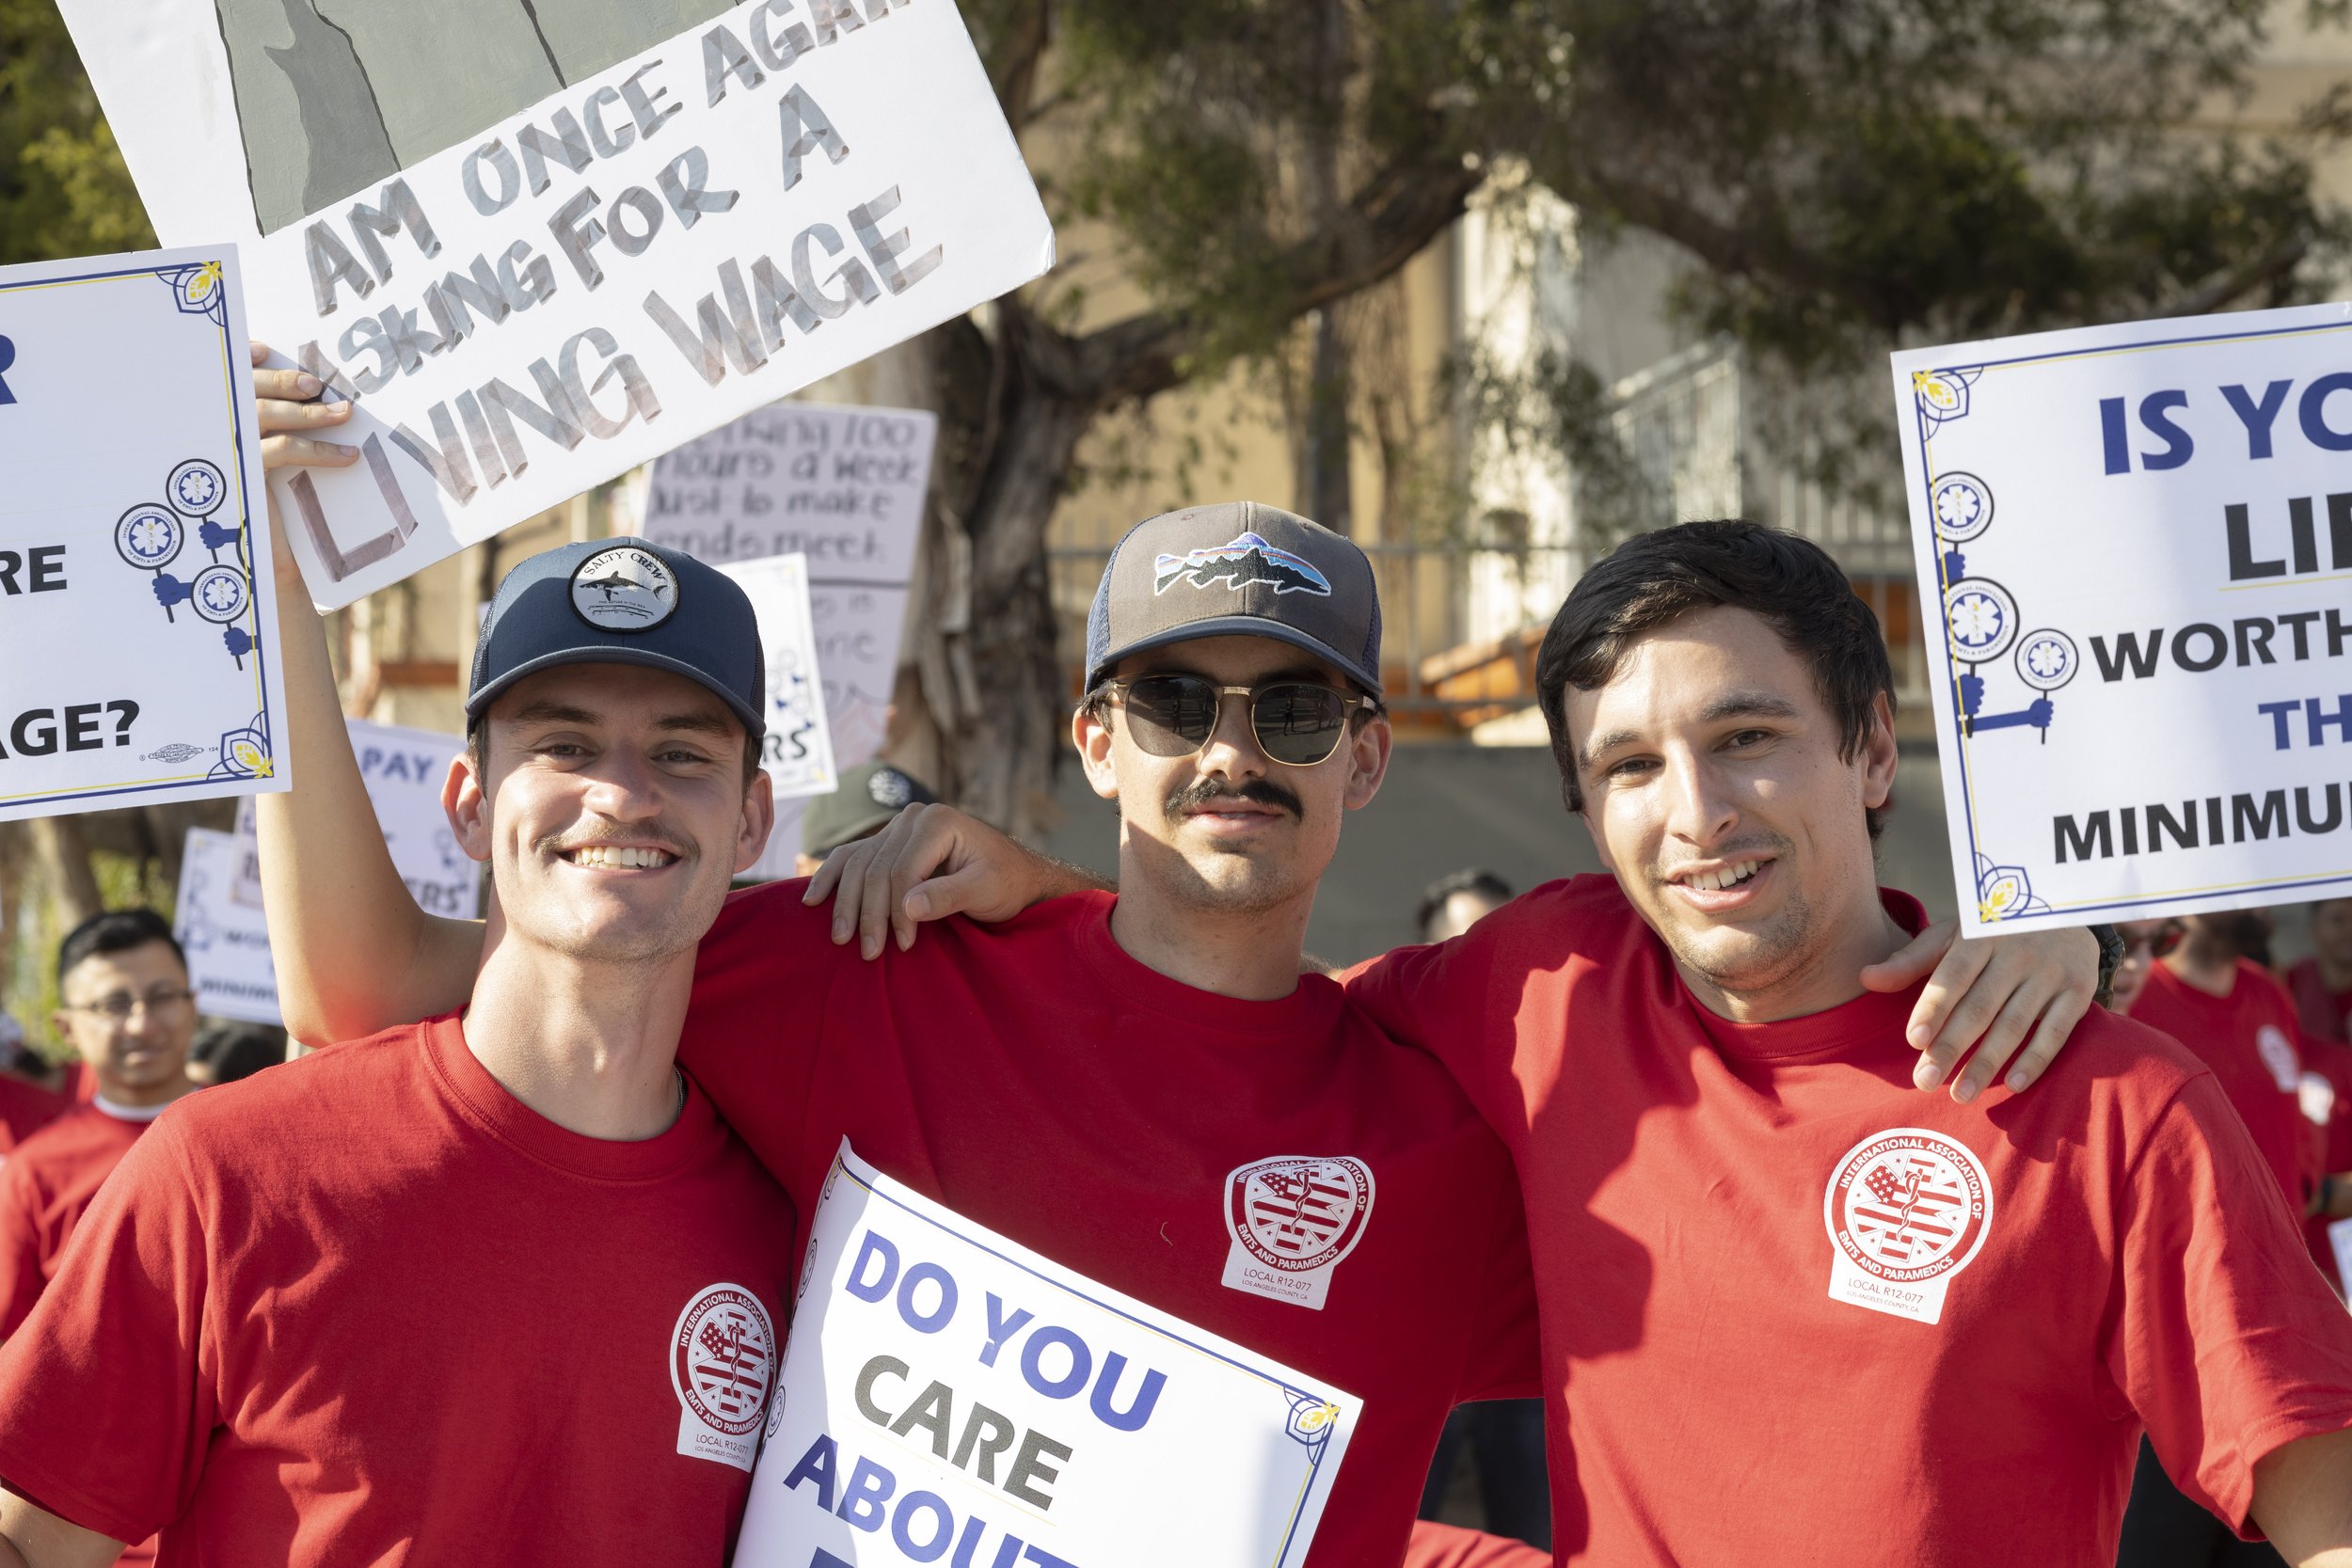  Josh Lebman (left), Zackary Silgero (middle) and Scott Masson (right) may look happy in this photo, but they stated that they are "pissed off and tired" of fighting for fair wages for a job that saves lives daily. Before the march, EMS workers congr